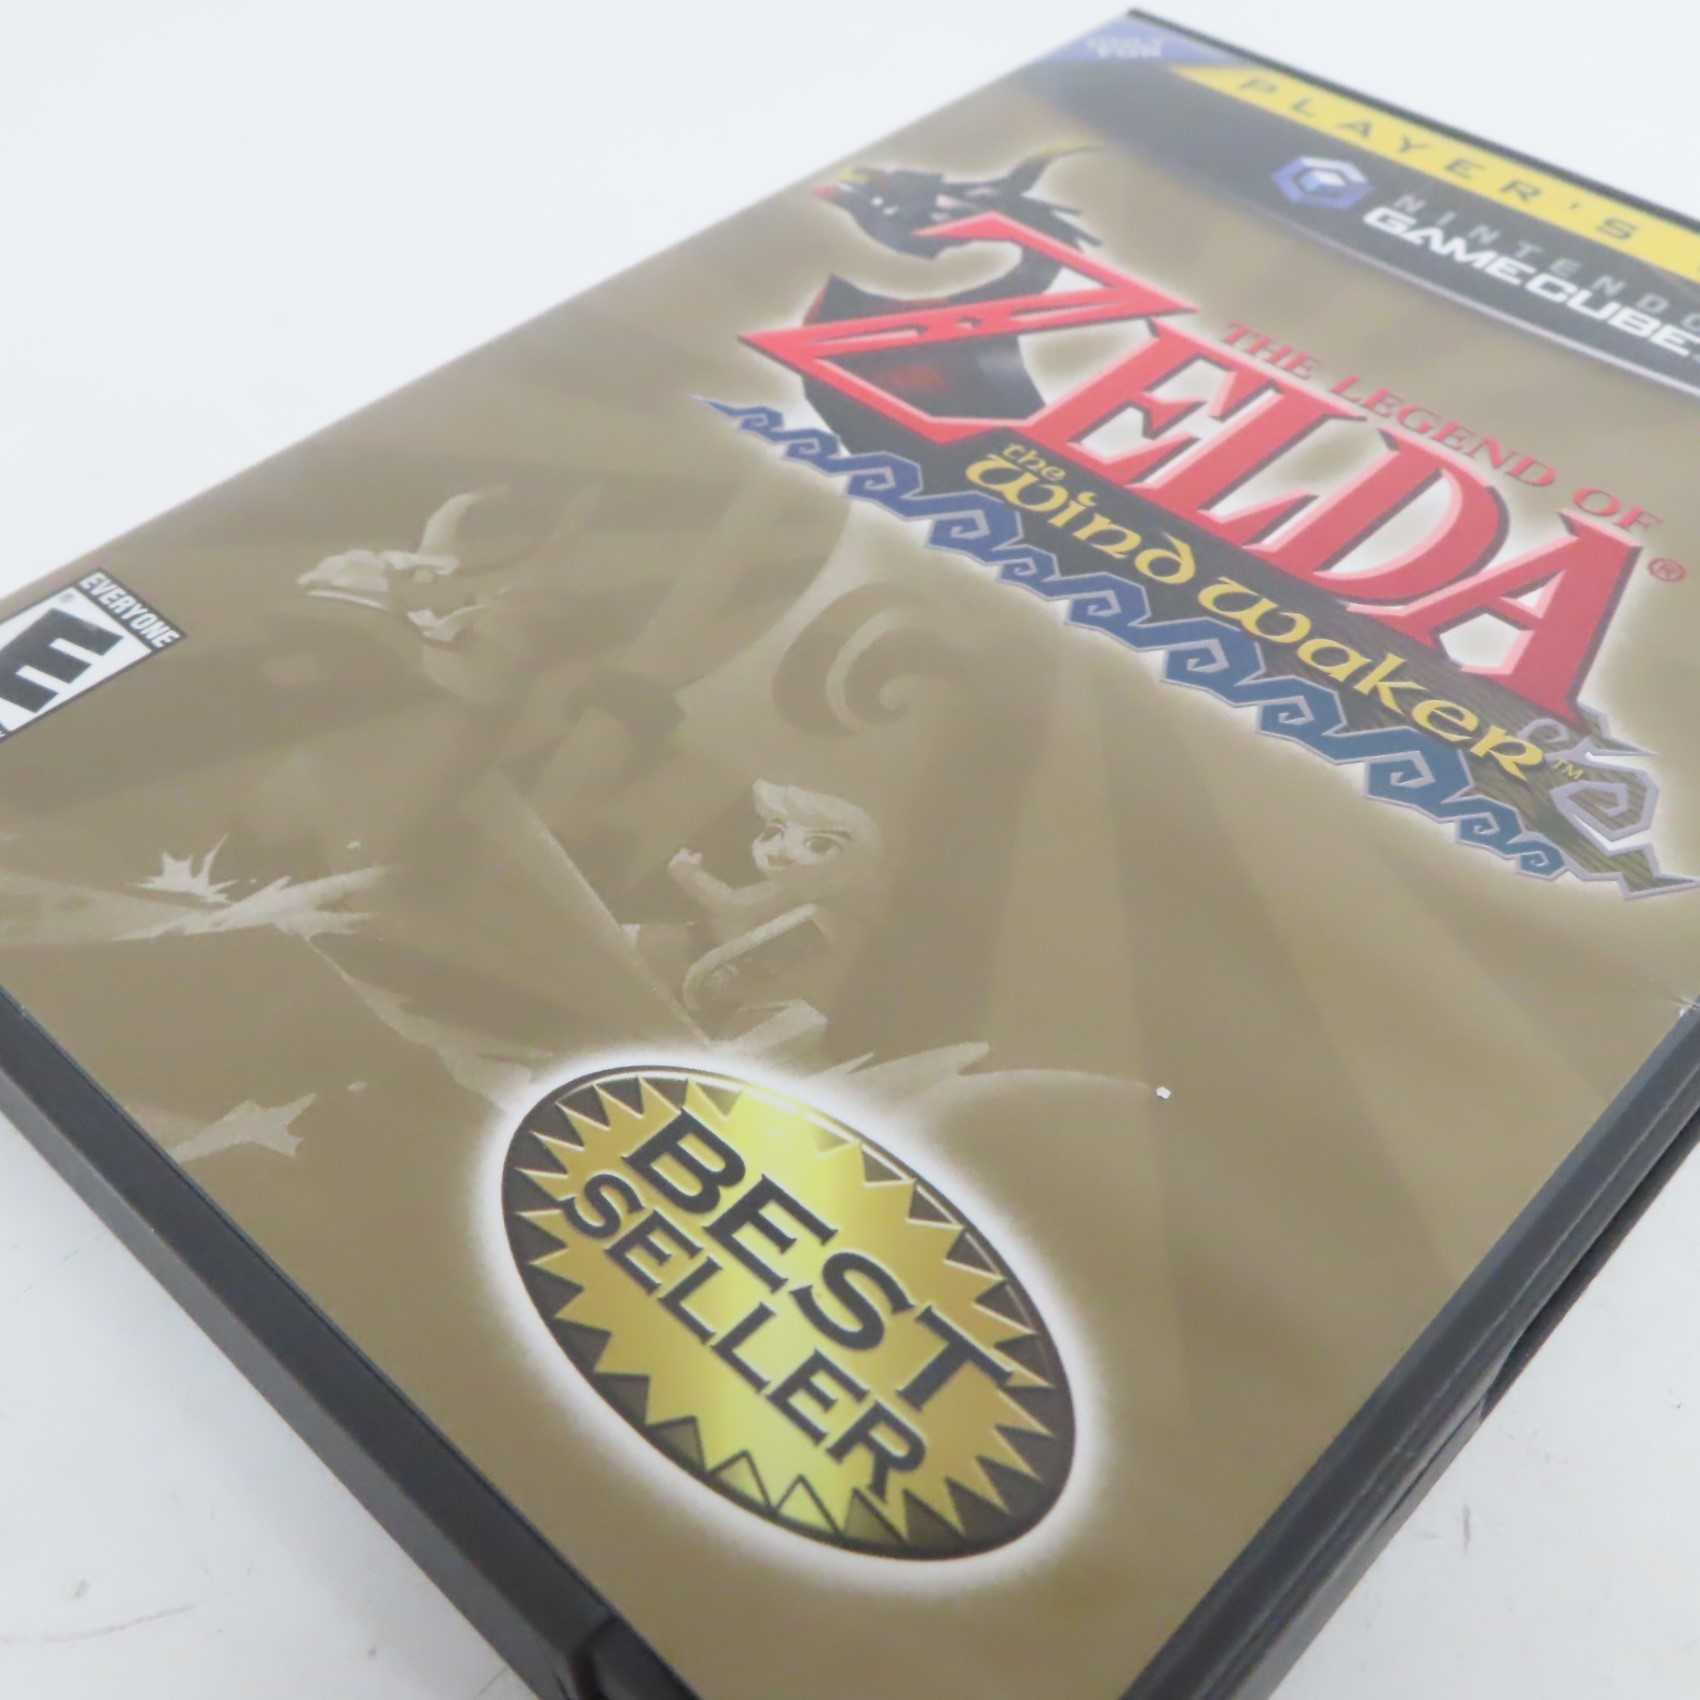 The Legend of Zelda: The Wind Waker (Player's Choice) for GameCube